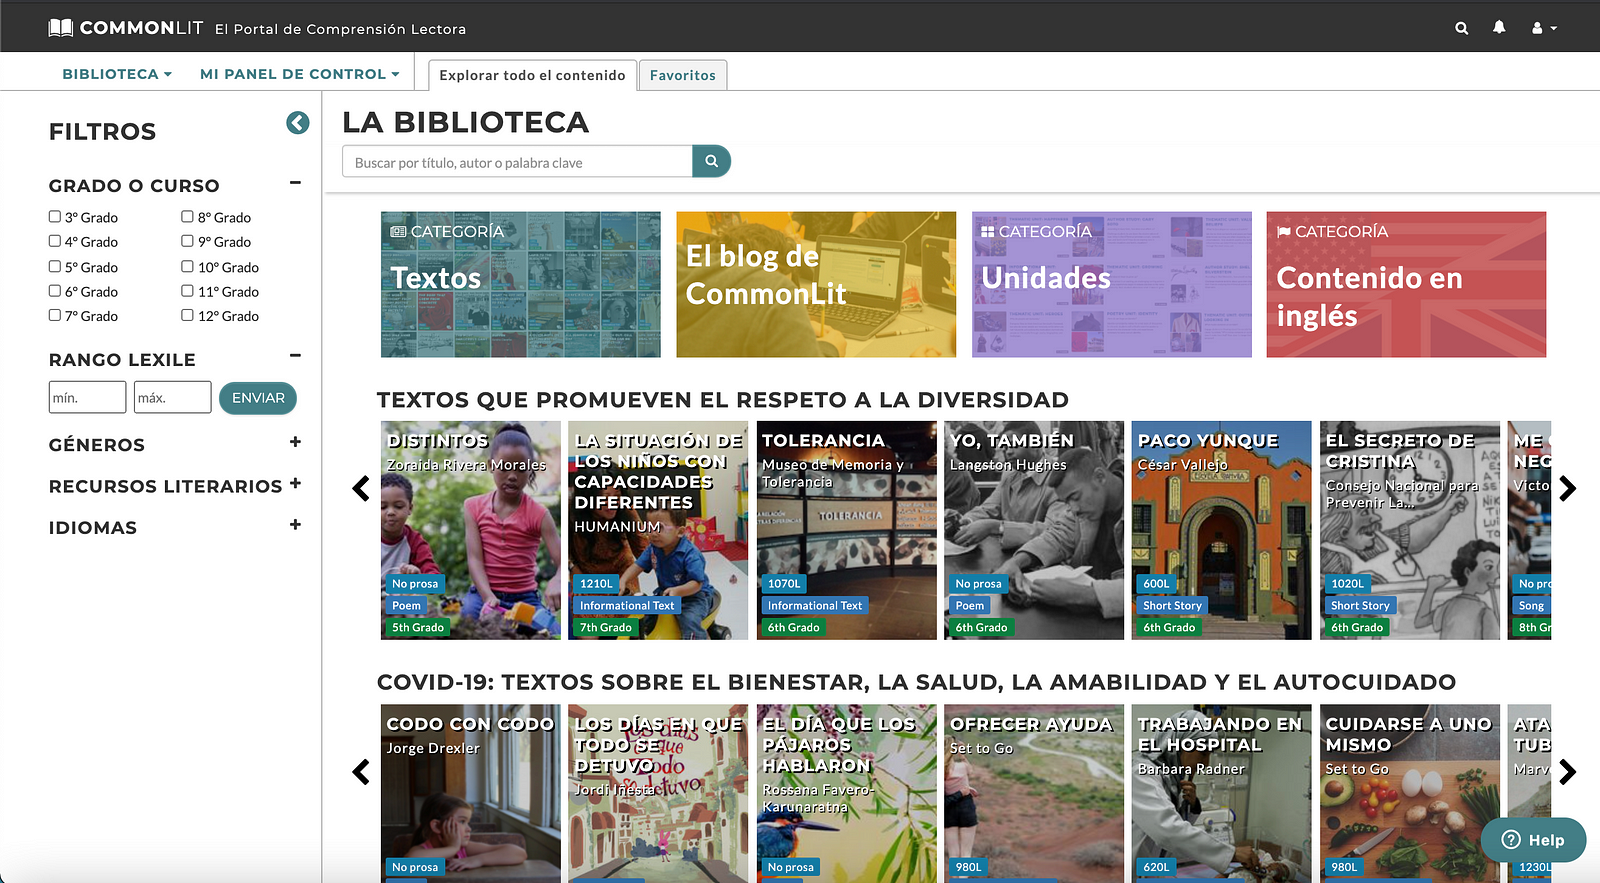 The main page of the Spanish library, with filters on the left and high-interest topic carousels of texts. 